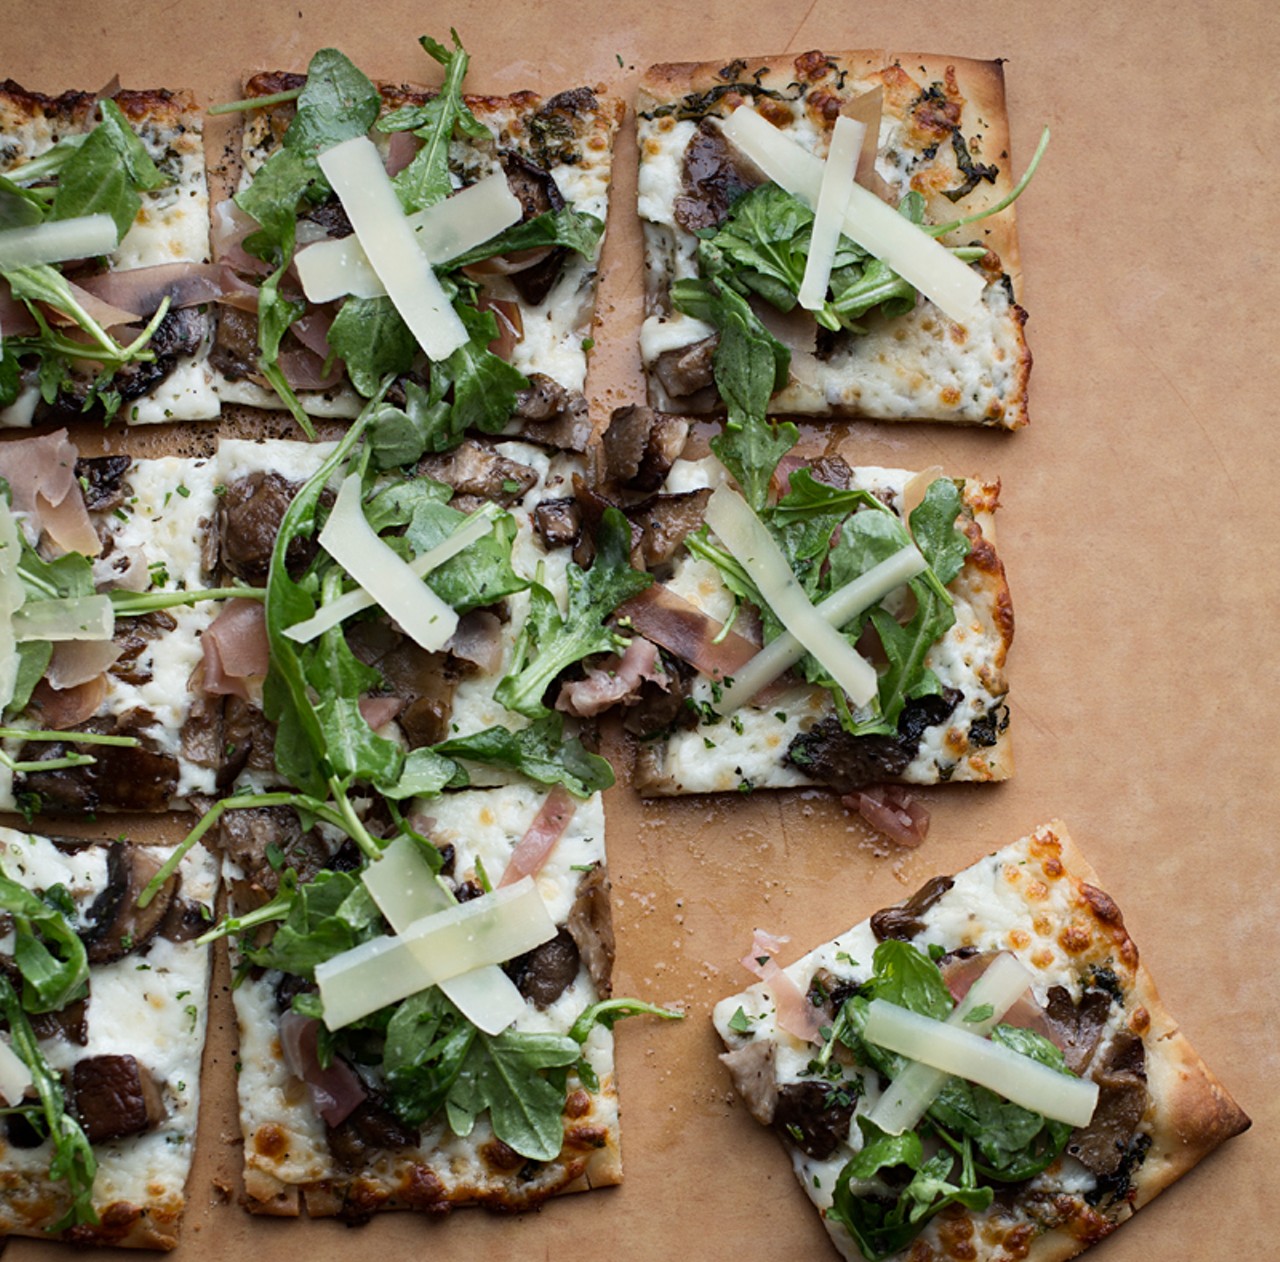 Its "Farmhouse White" pizza is topped with roasted garlic-herb oil, mozzarella, and wild mushrooms, then finished with prosciutto, shaved parmesan and arugula